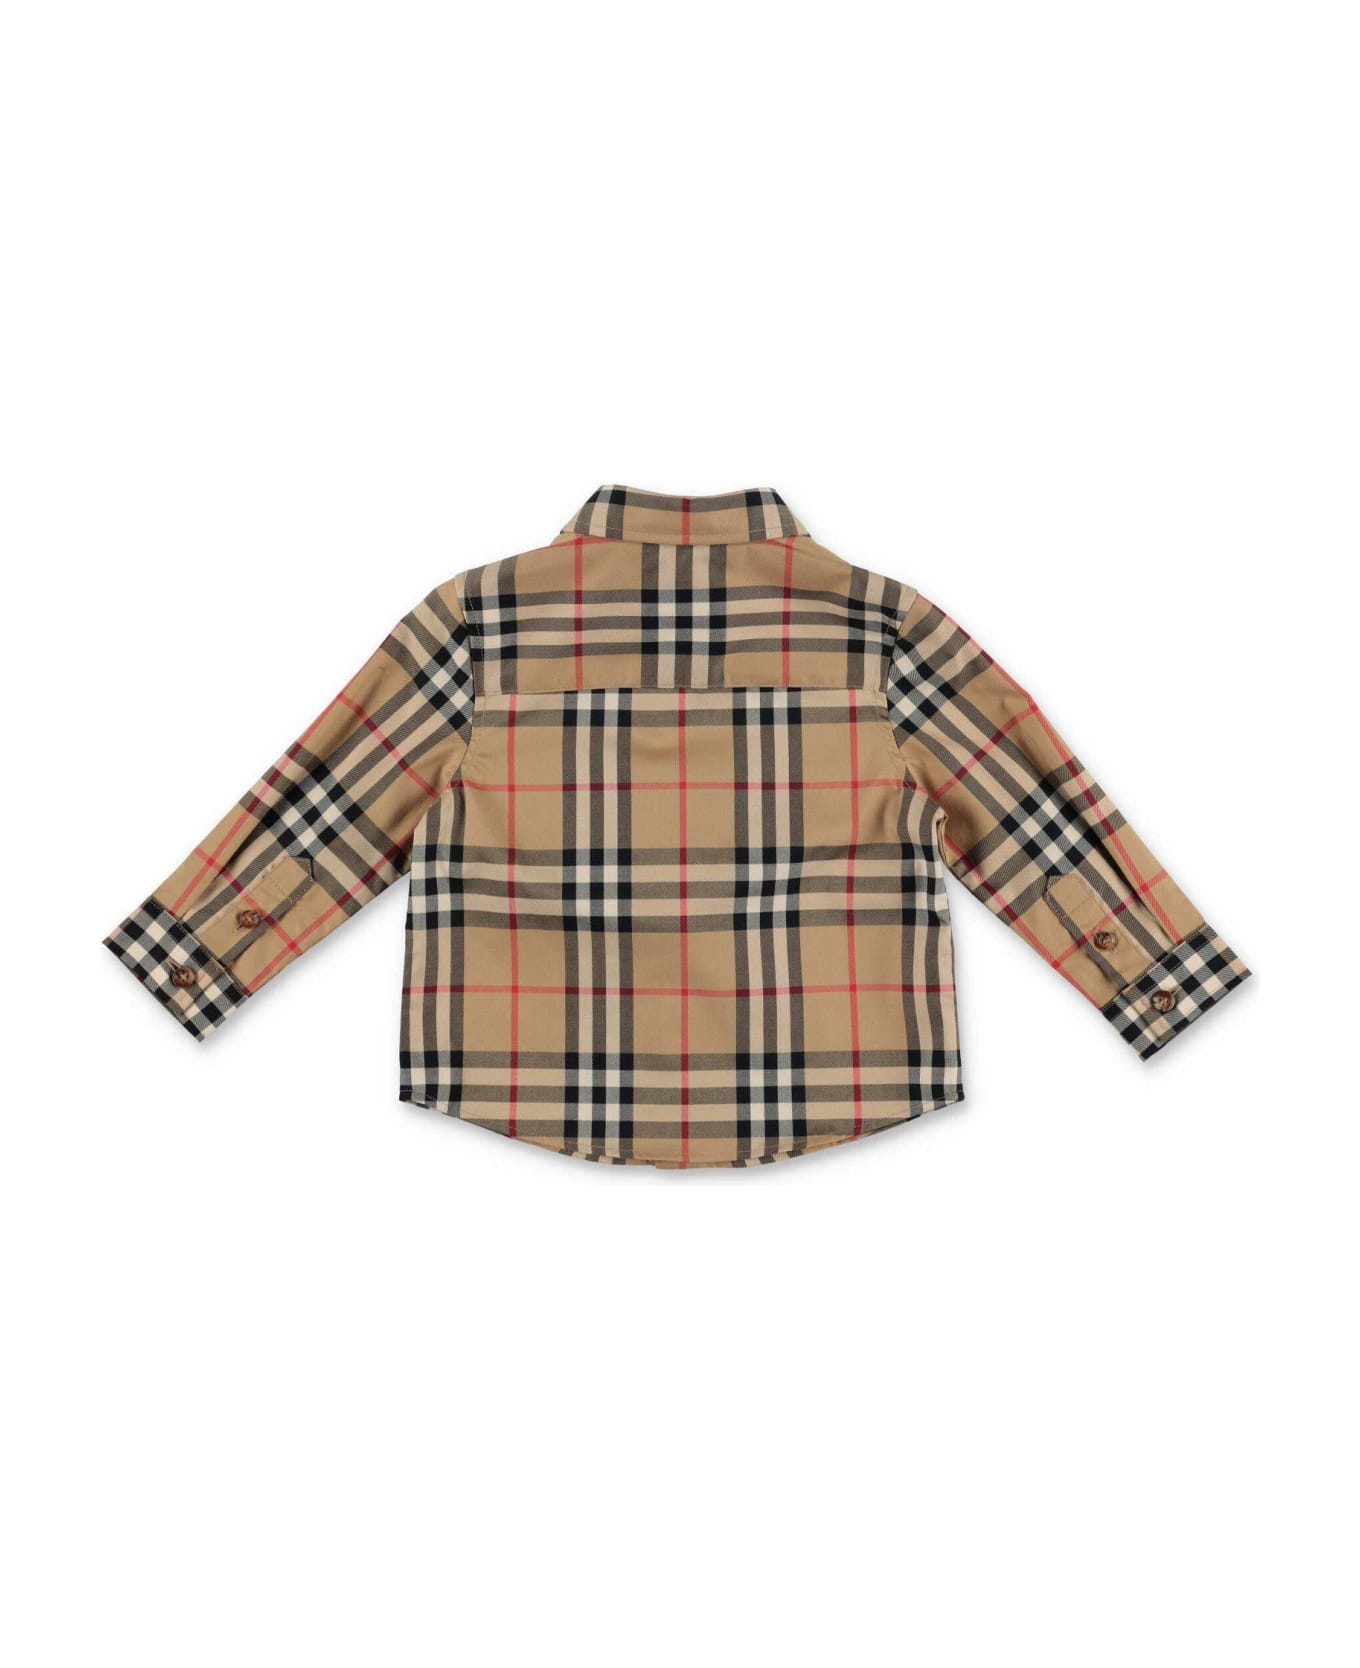 Burberry Checked Long-sleeved Shirt - Burberry White Sweatshirt For Girl With Iconic Bear